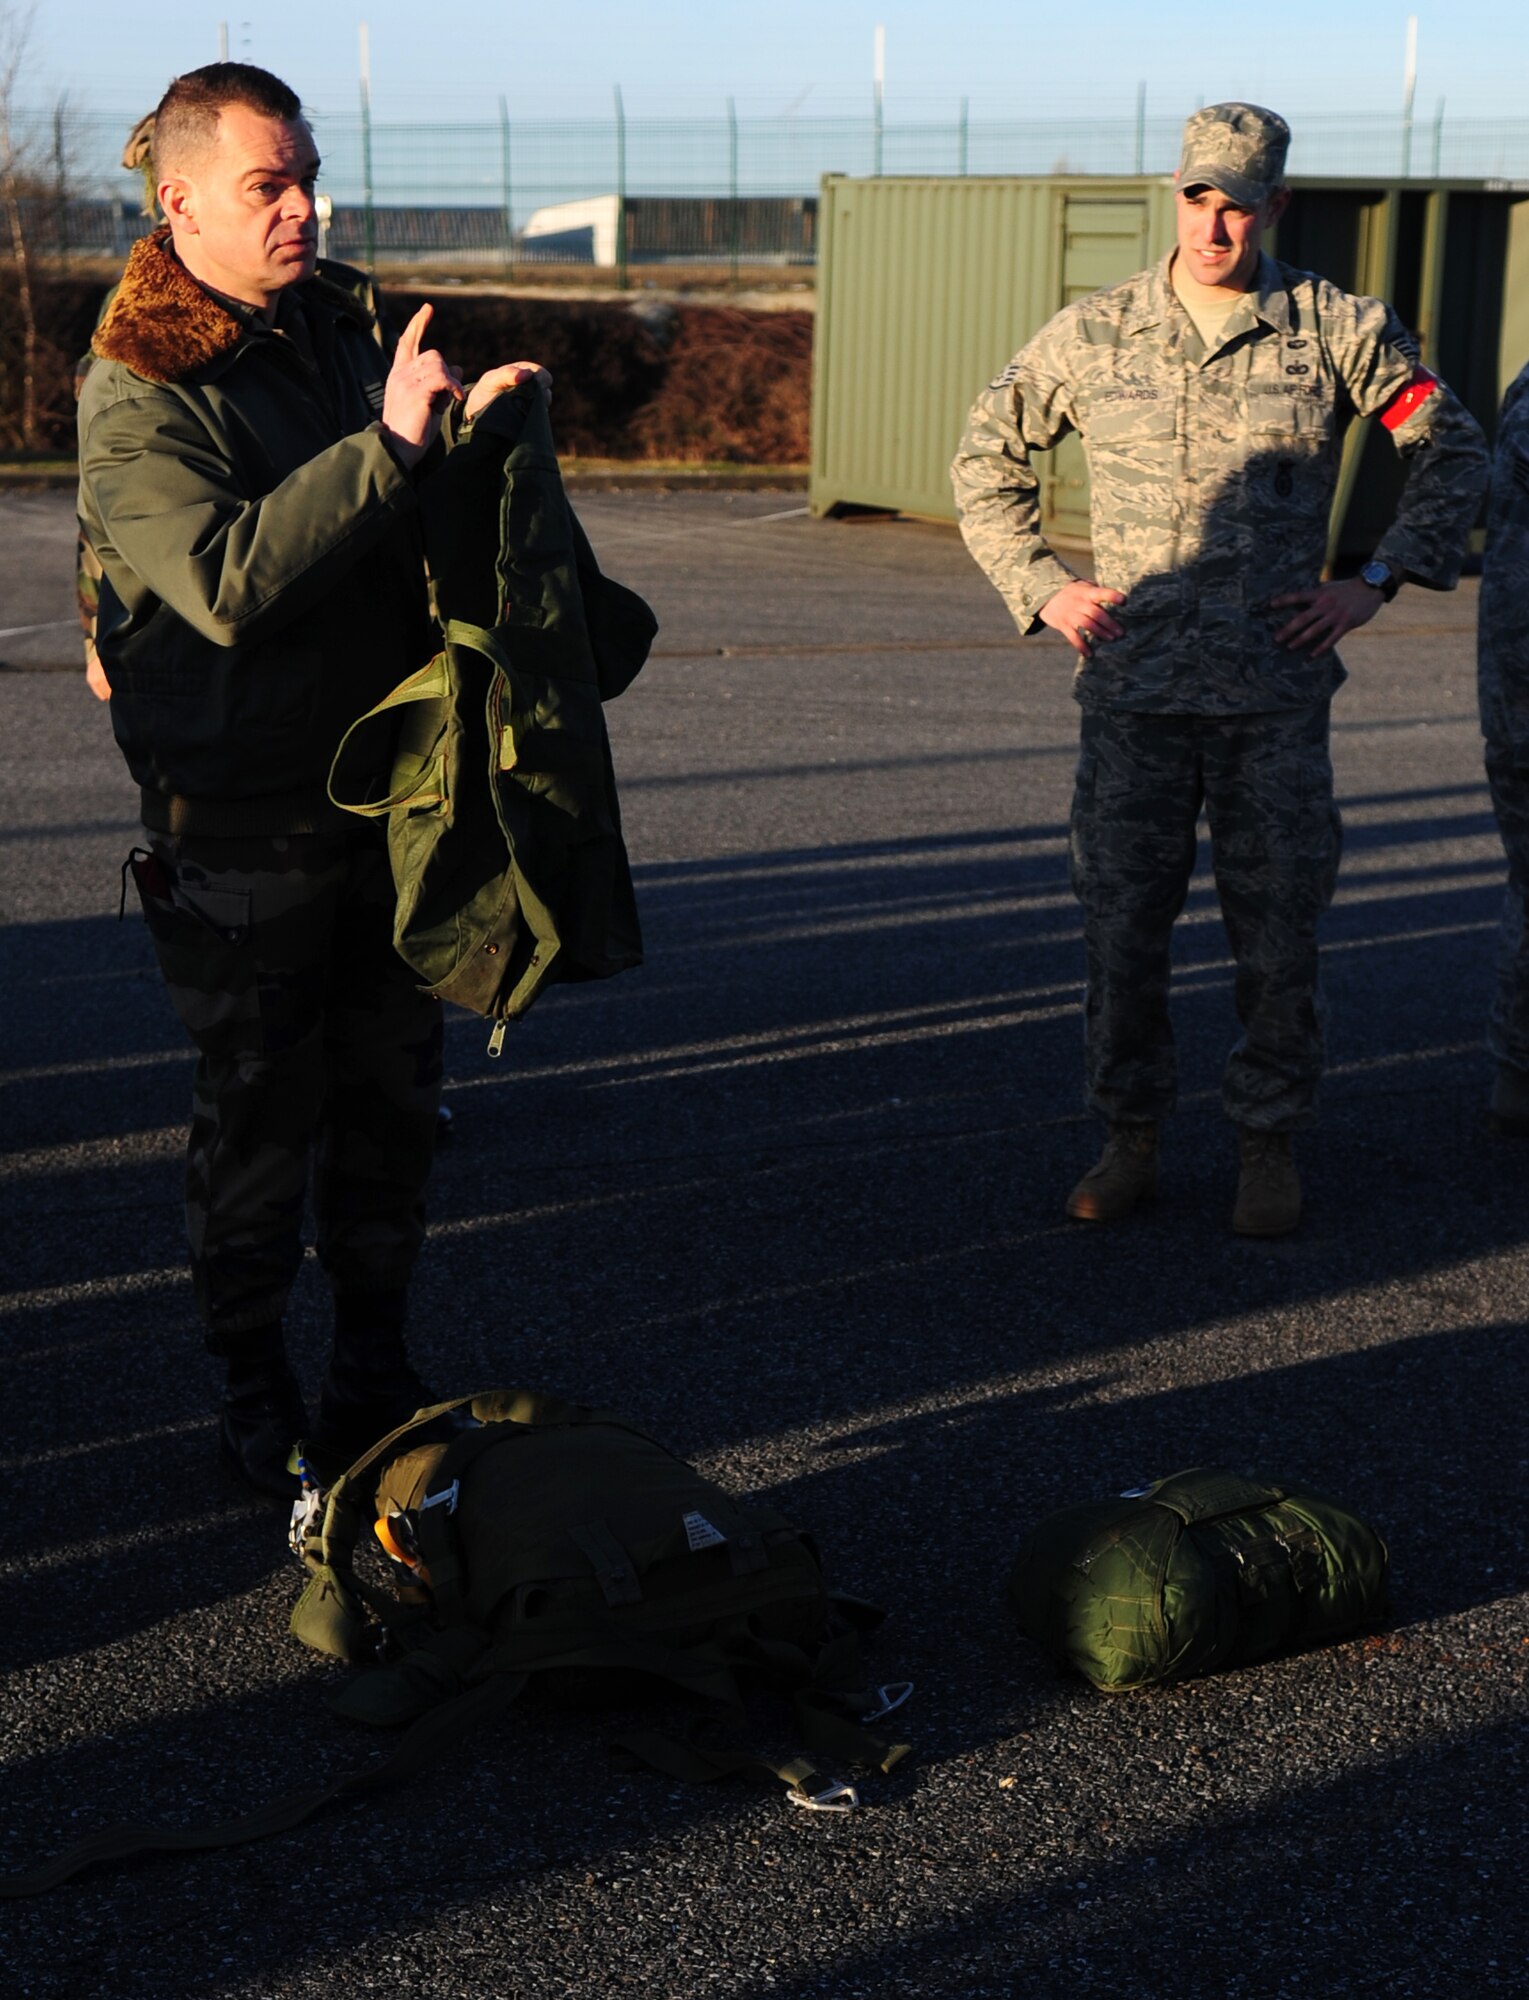 French Marine Major Yann Le Bastard, a freefall instructor provides translation for French paratroopers that are being trained and preparing to jump from a U.S. Military aircraft, using U.S. Military parashoots on March 2, 2010. Members of the 435th Contingency Response Group and the 5th Quartermaster Company joined with their French military counterparts for a week of training at the École des troupes aéroportées (ETAP), or School of Airborne Troops, a military school dedicated to training the military paratroopers   of the French army, located in the town of Pau, in the département of Pyrénées-Atlantiques, France.  The ETAP is responsible for training paratroopers, and for international cooperation and promotion of paratroop culture. (U.S. Air Force Photo by Staff Sgt. Jocelyn Rich)